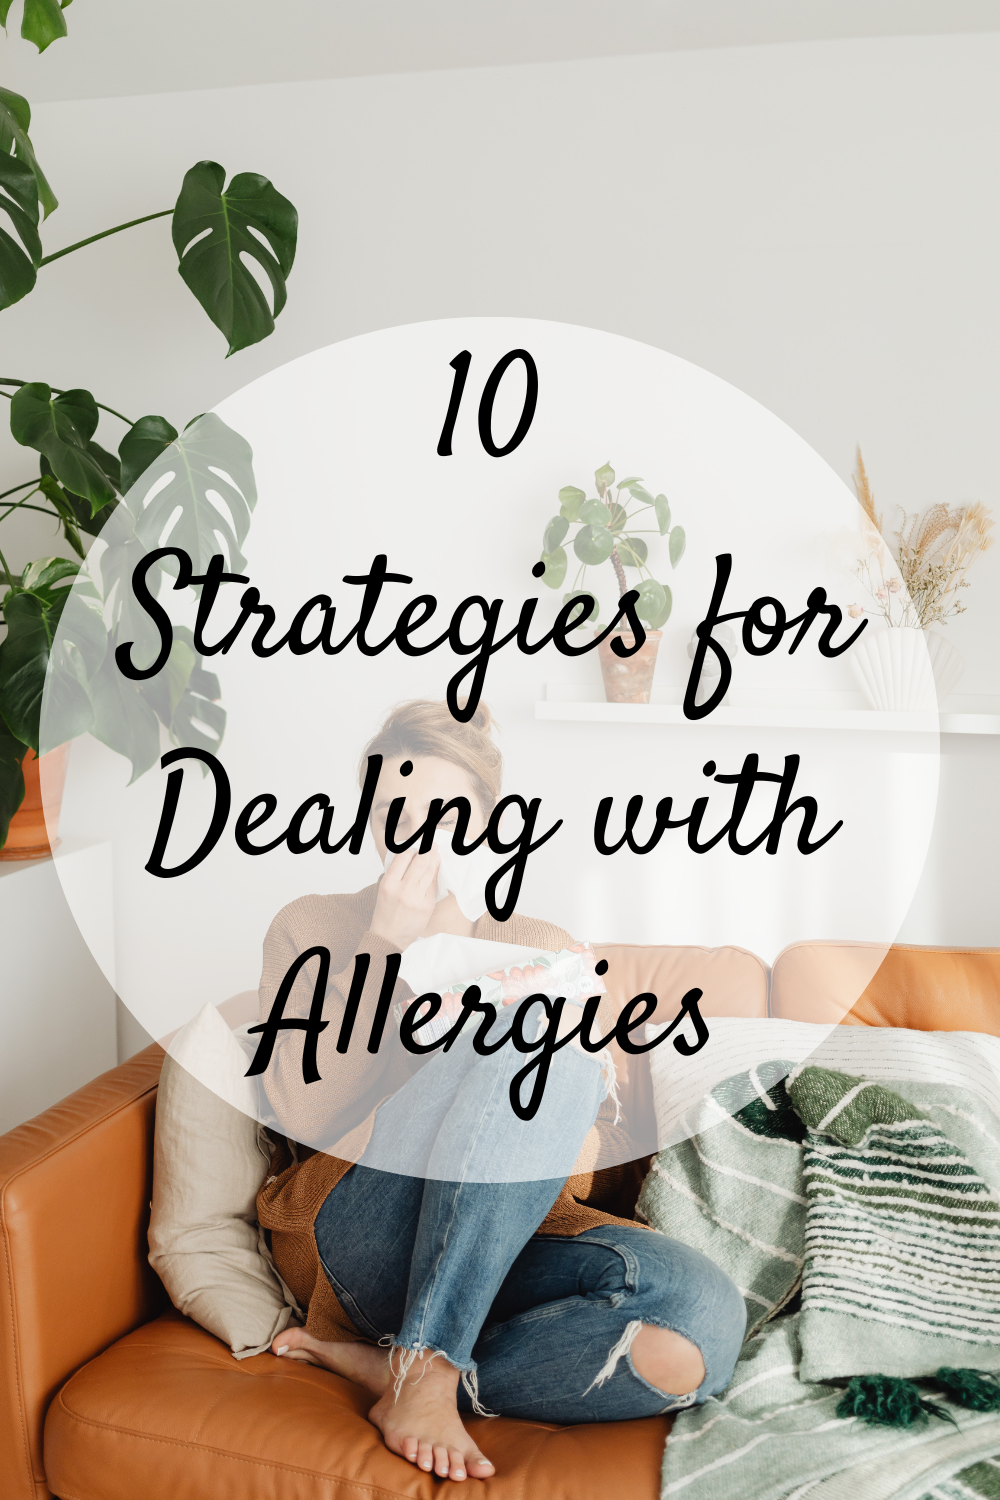 10 Strategies for Dealing with Allergies